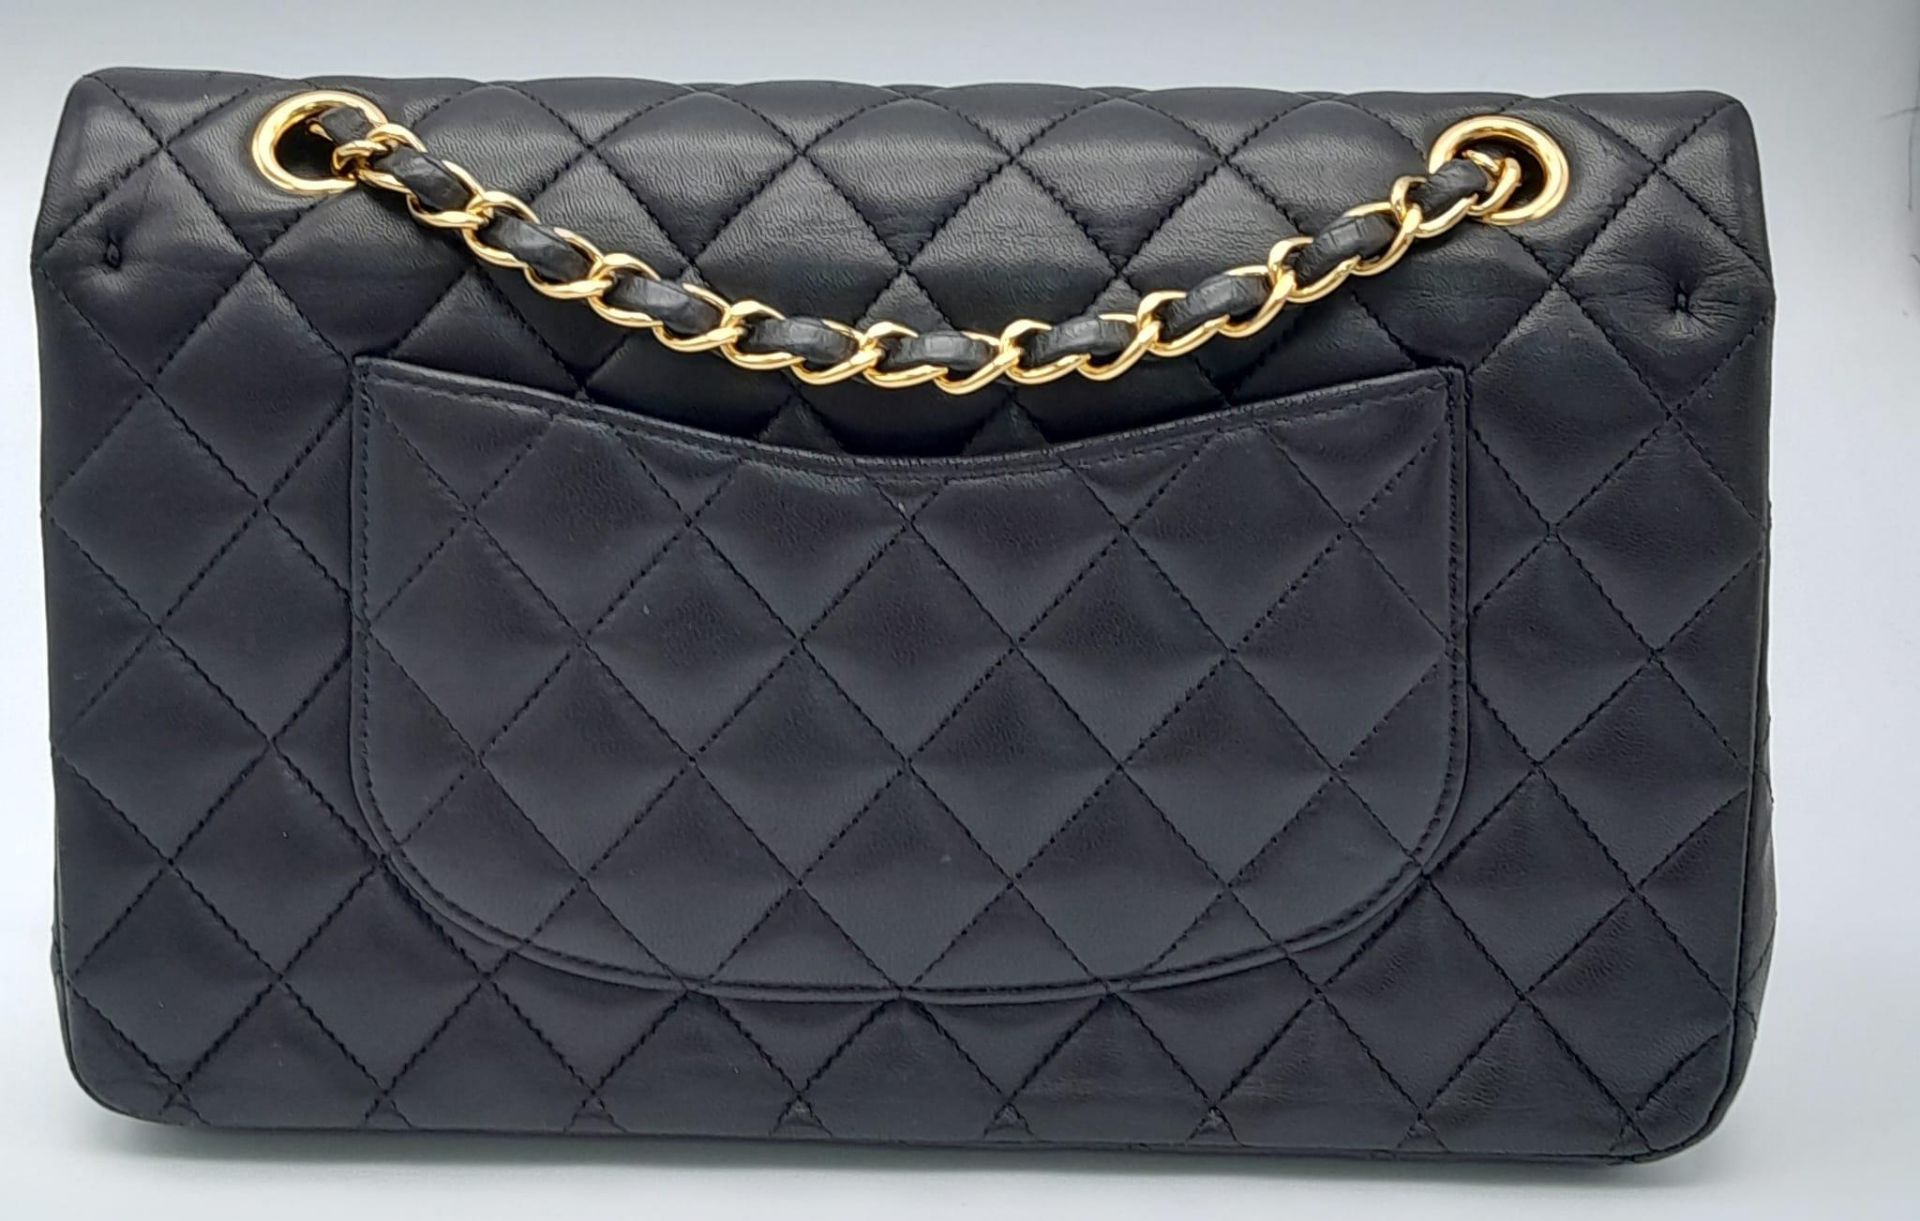 A Classic Chanel Double Flap Bag. Quilted lambskin black leather exterior with gilded Chanel logo - Image 11 of 13